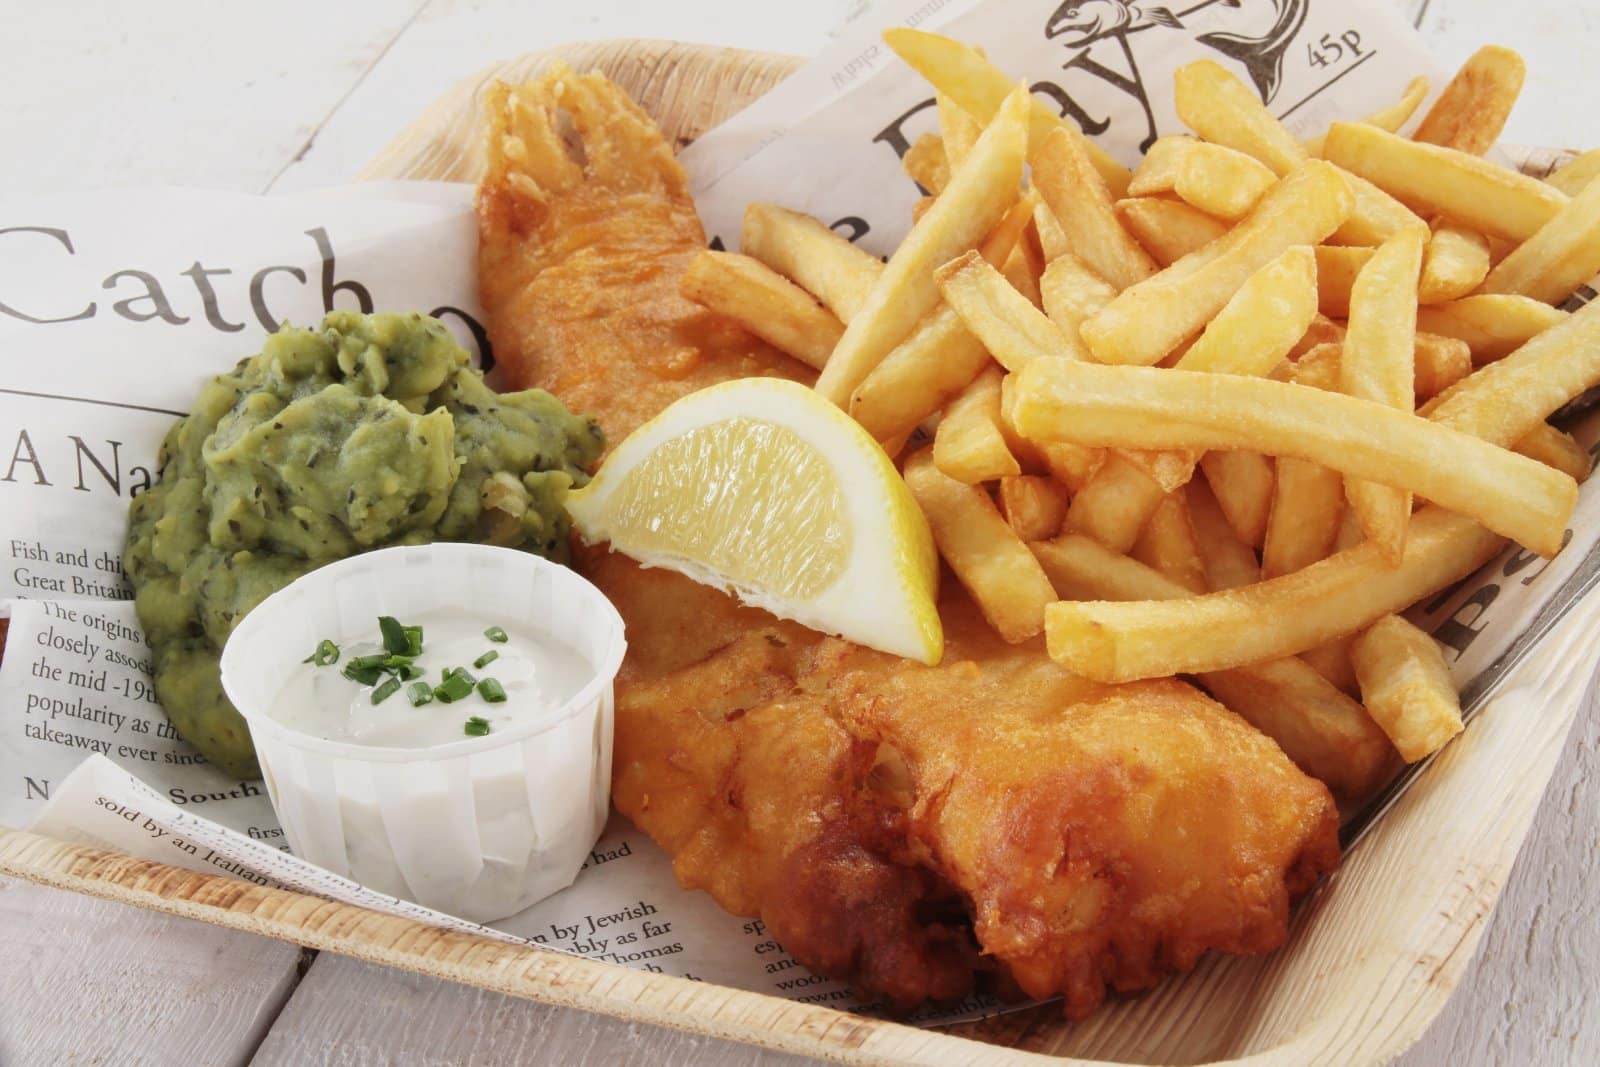 Image Credit: Shutterstock / neil langan <p><span>A British classic: battered and fried fish served with thick-cut fries. Best enjoyed by the seaside, with a sprinkle of vinegar and a dash of salt.</span></p>